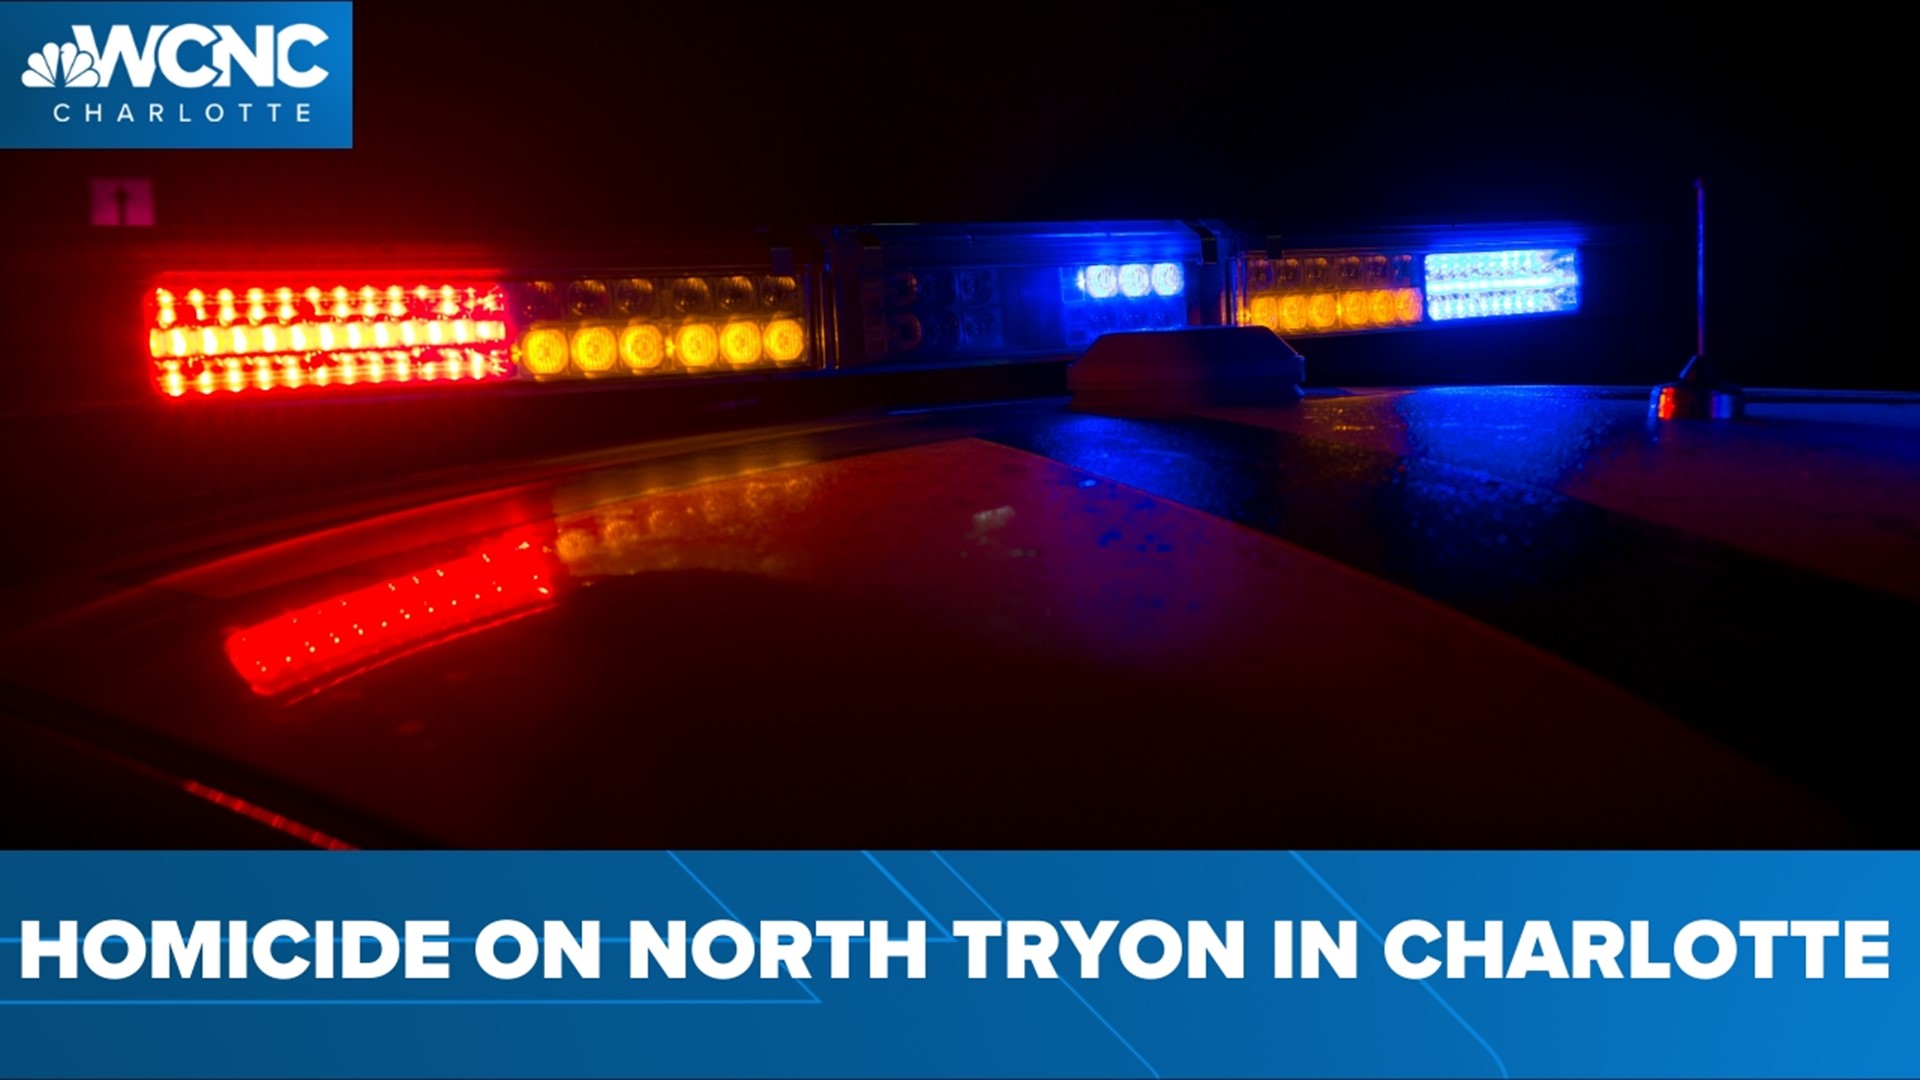 Officers responded to North Tryon street shortly after midnight